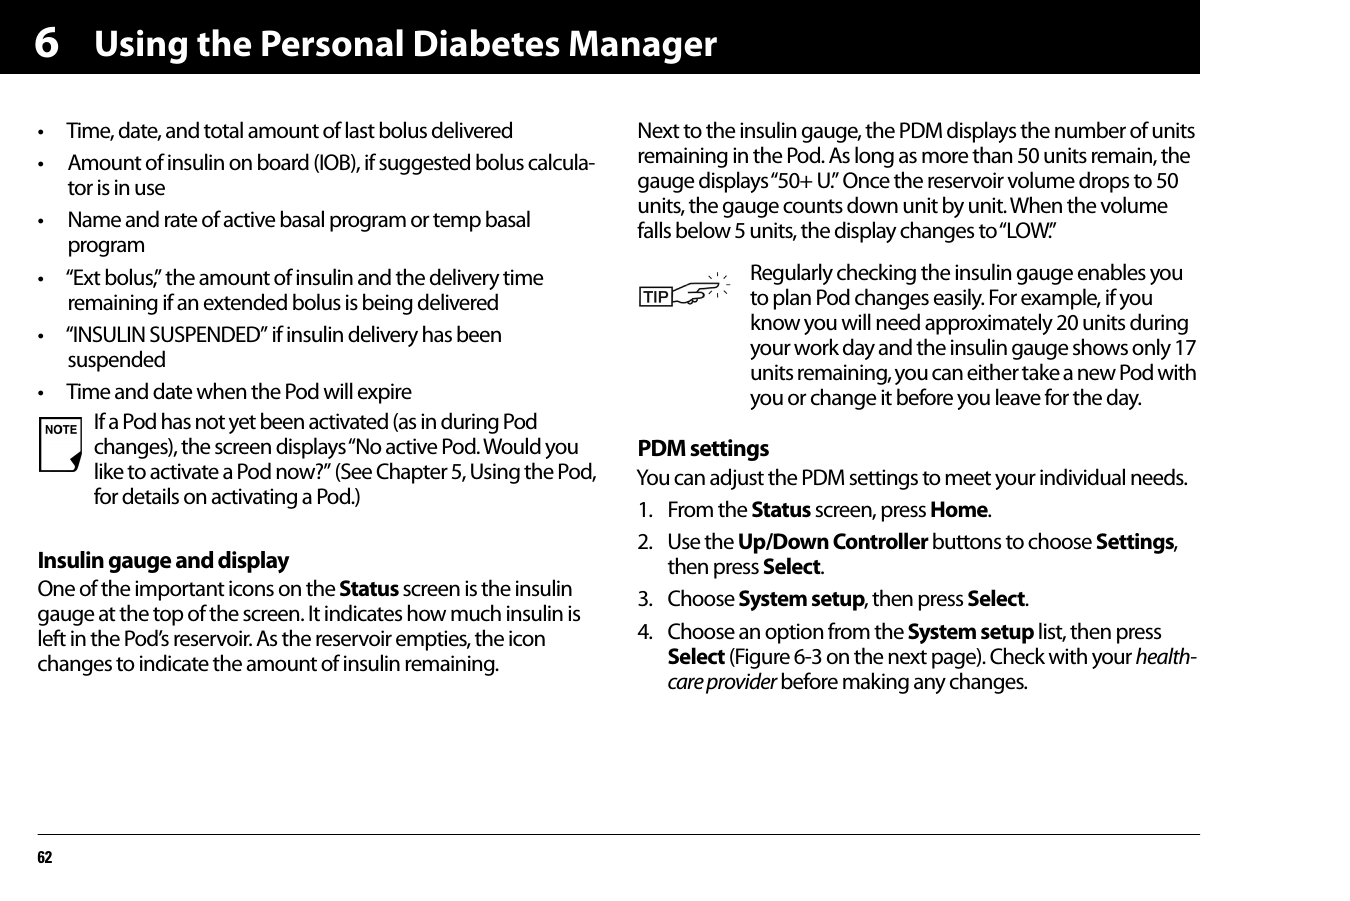 Using the Personal Diabetes Manager626• Time, date, and total amount of last bolus delivered• Amount of insulin on board (IOB), if suggested bolus calcula-tor is in use• Name and rate of active basal program or temp basal program • “Ext bolus,” the amount of insulin and the delivery time remaining if an extended bolus is being delivered• “INSULIN SUSPENDED” if insulin delivery has been suspended • Time and date when the Pod will expireInsulin gauge and displayOne of the important icons on the Status screen is the insulin gauge at the top of the screen. It indicates how much insulin is left in the Pod’s reservoir. As the reservoir empties, the icon changes to indicate the amount of insulin remaining.Next to the insulin gauge, the PDM displays the number of units remaining in the Pod. As long as more than 50 units remain, the gauge displays “50+ U.” Once the reservoir volume drops to 50 units, the gauge counts down unit by unit. When the volume falls below 5 units, the display changes to “LOW.”PDM settingsYou can adjust the PDM settings to meet your individual needs.1. From the Status screen, press Home.2. Use the Up/Down Controller buttons to choose Settings, then press Select.3. Choose System setup, then press Select.4. Choose an option from the System setup list, then press Select (Figure 6-3 on the next page). Check with your health-care provider before making any changes.If a Pod has not yet been activated (as in during Pod changes), the screen displays “No active Pod. Would you like to activate a Pod now?” (See Chapter 5, Using the Pod, for details on activating a Pod.)Regularly checking the insulin gauge enables you to plan Pod changes easily. For example, if you know you will need approximately 20 units during your work day and the insulin gauge shows only 17 units remaining, you can either take a new Pod with you or change it before you leave for the day.